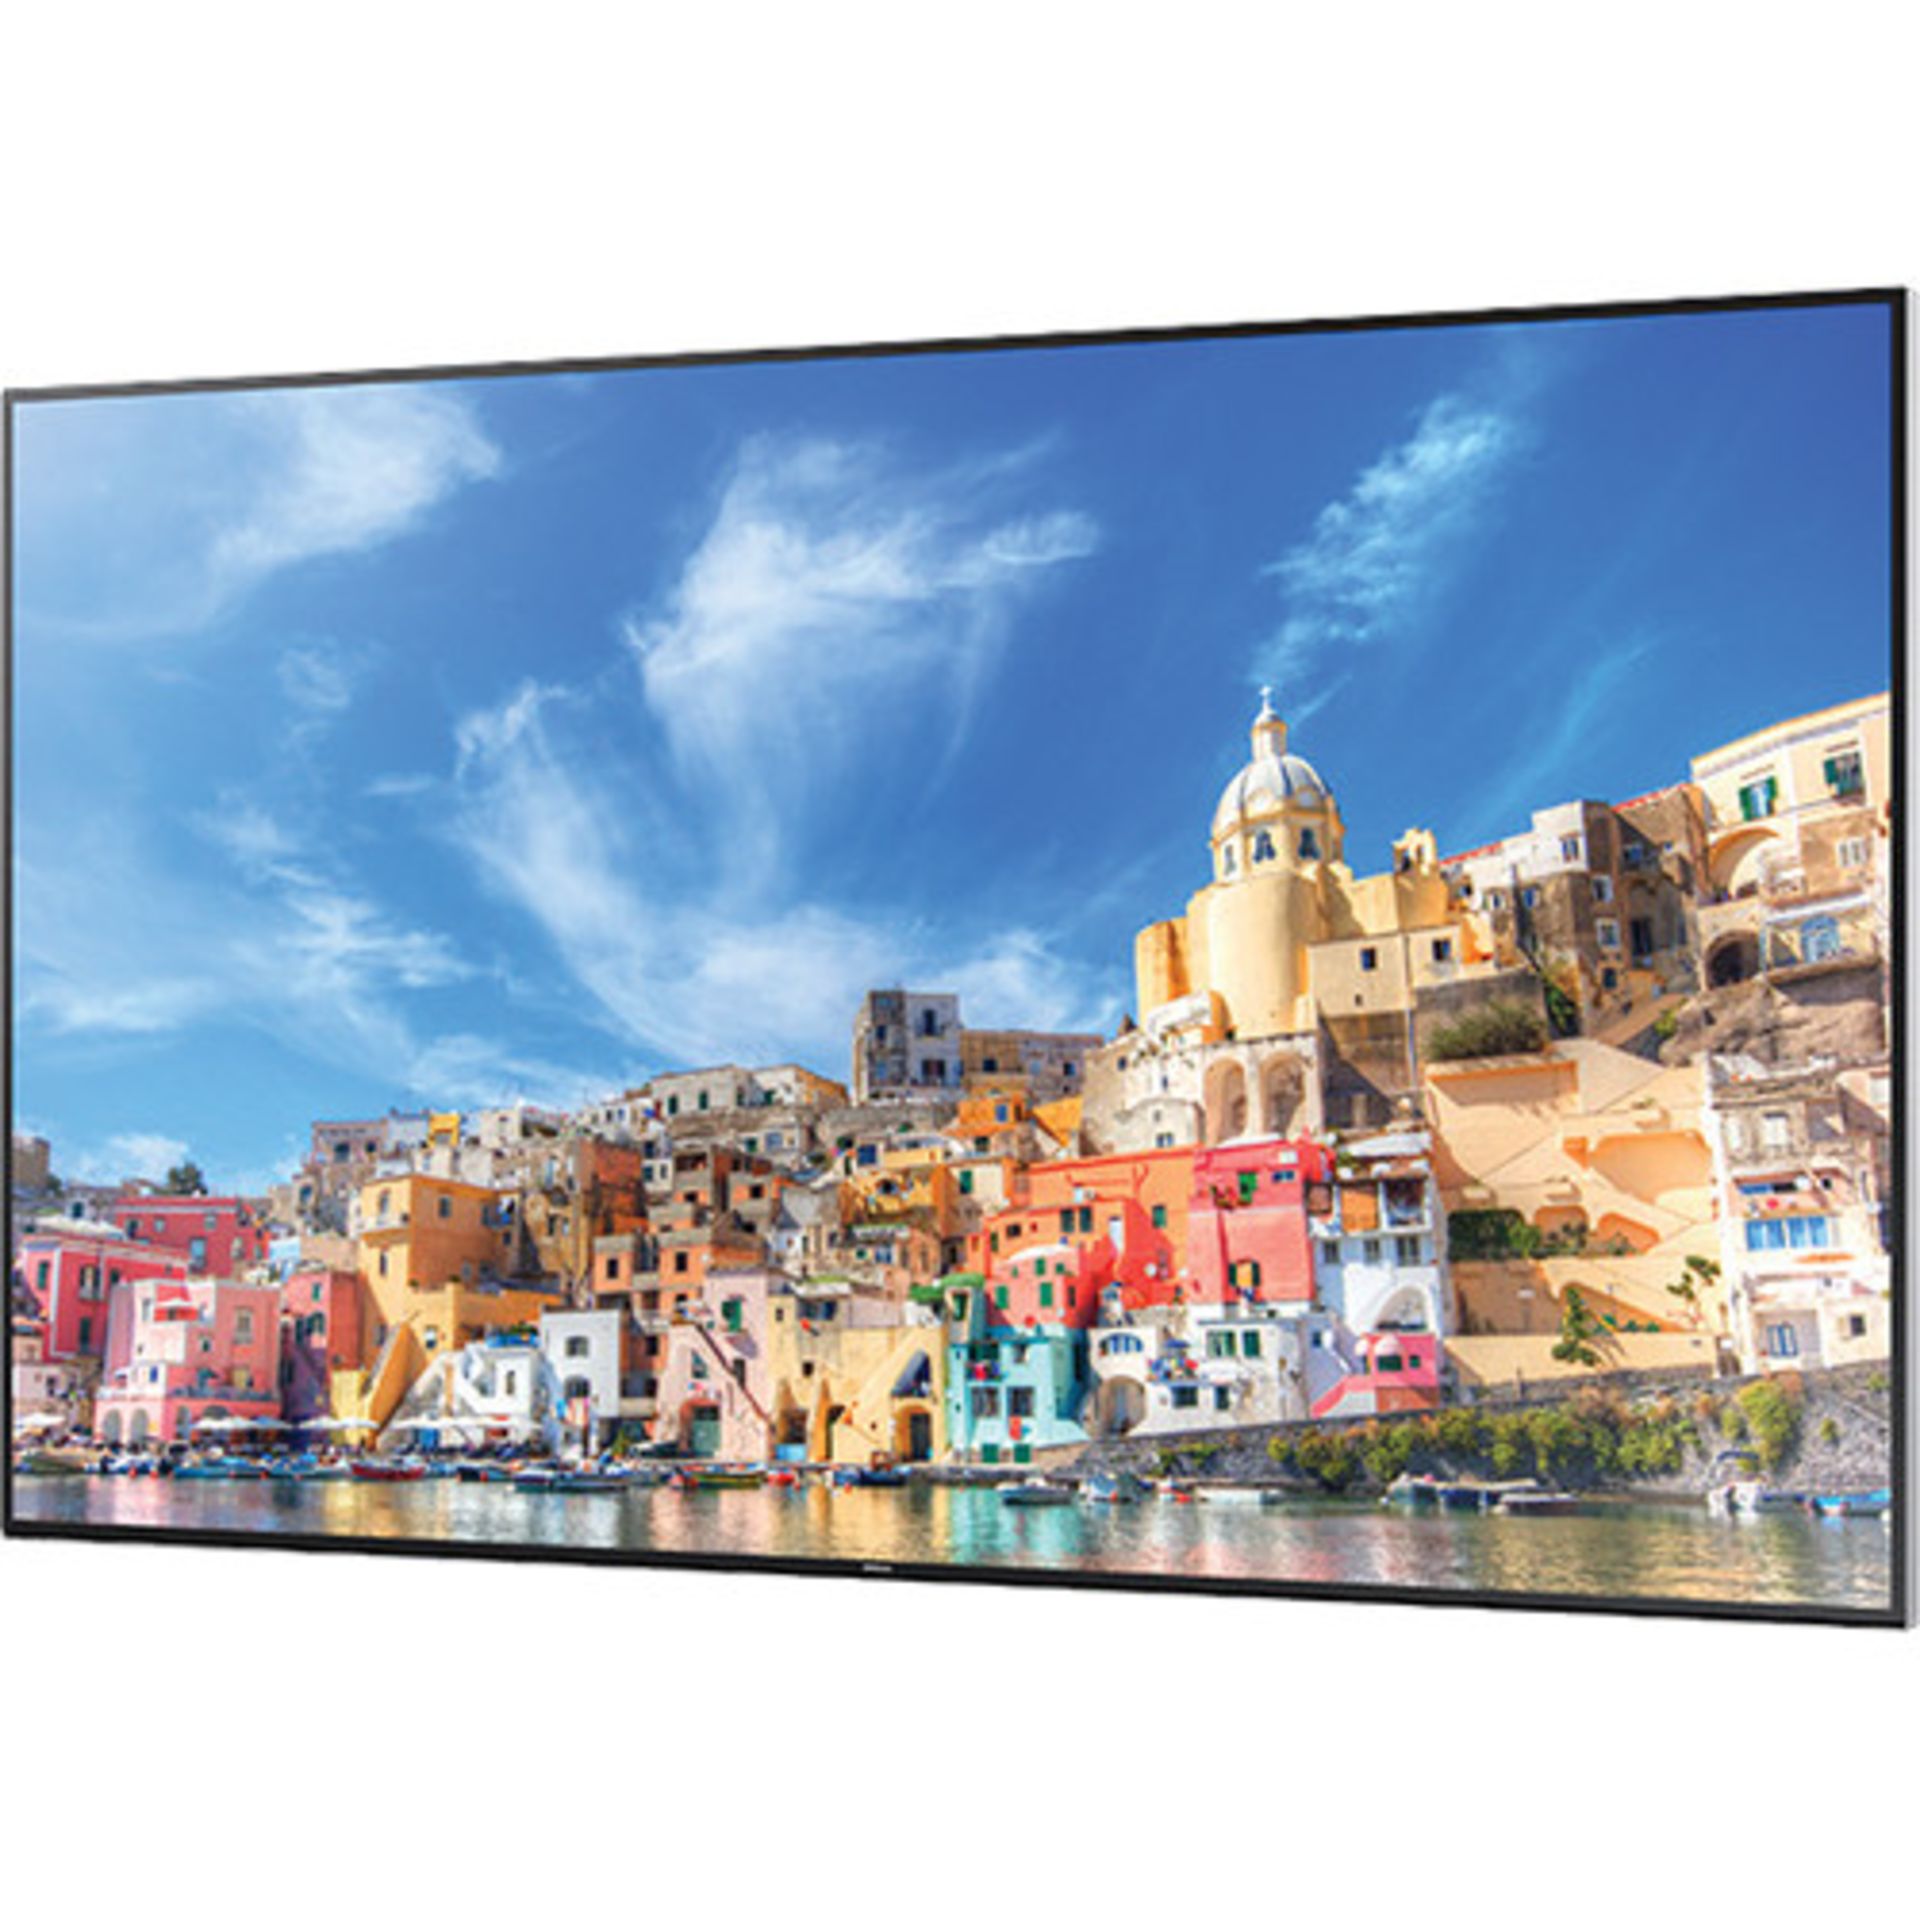 1 x Samsung QM85D Professional 85 Inch Commercial 4K LED Monitor - CL555 - Ref: WL197 - Location: